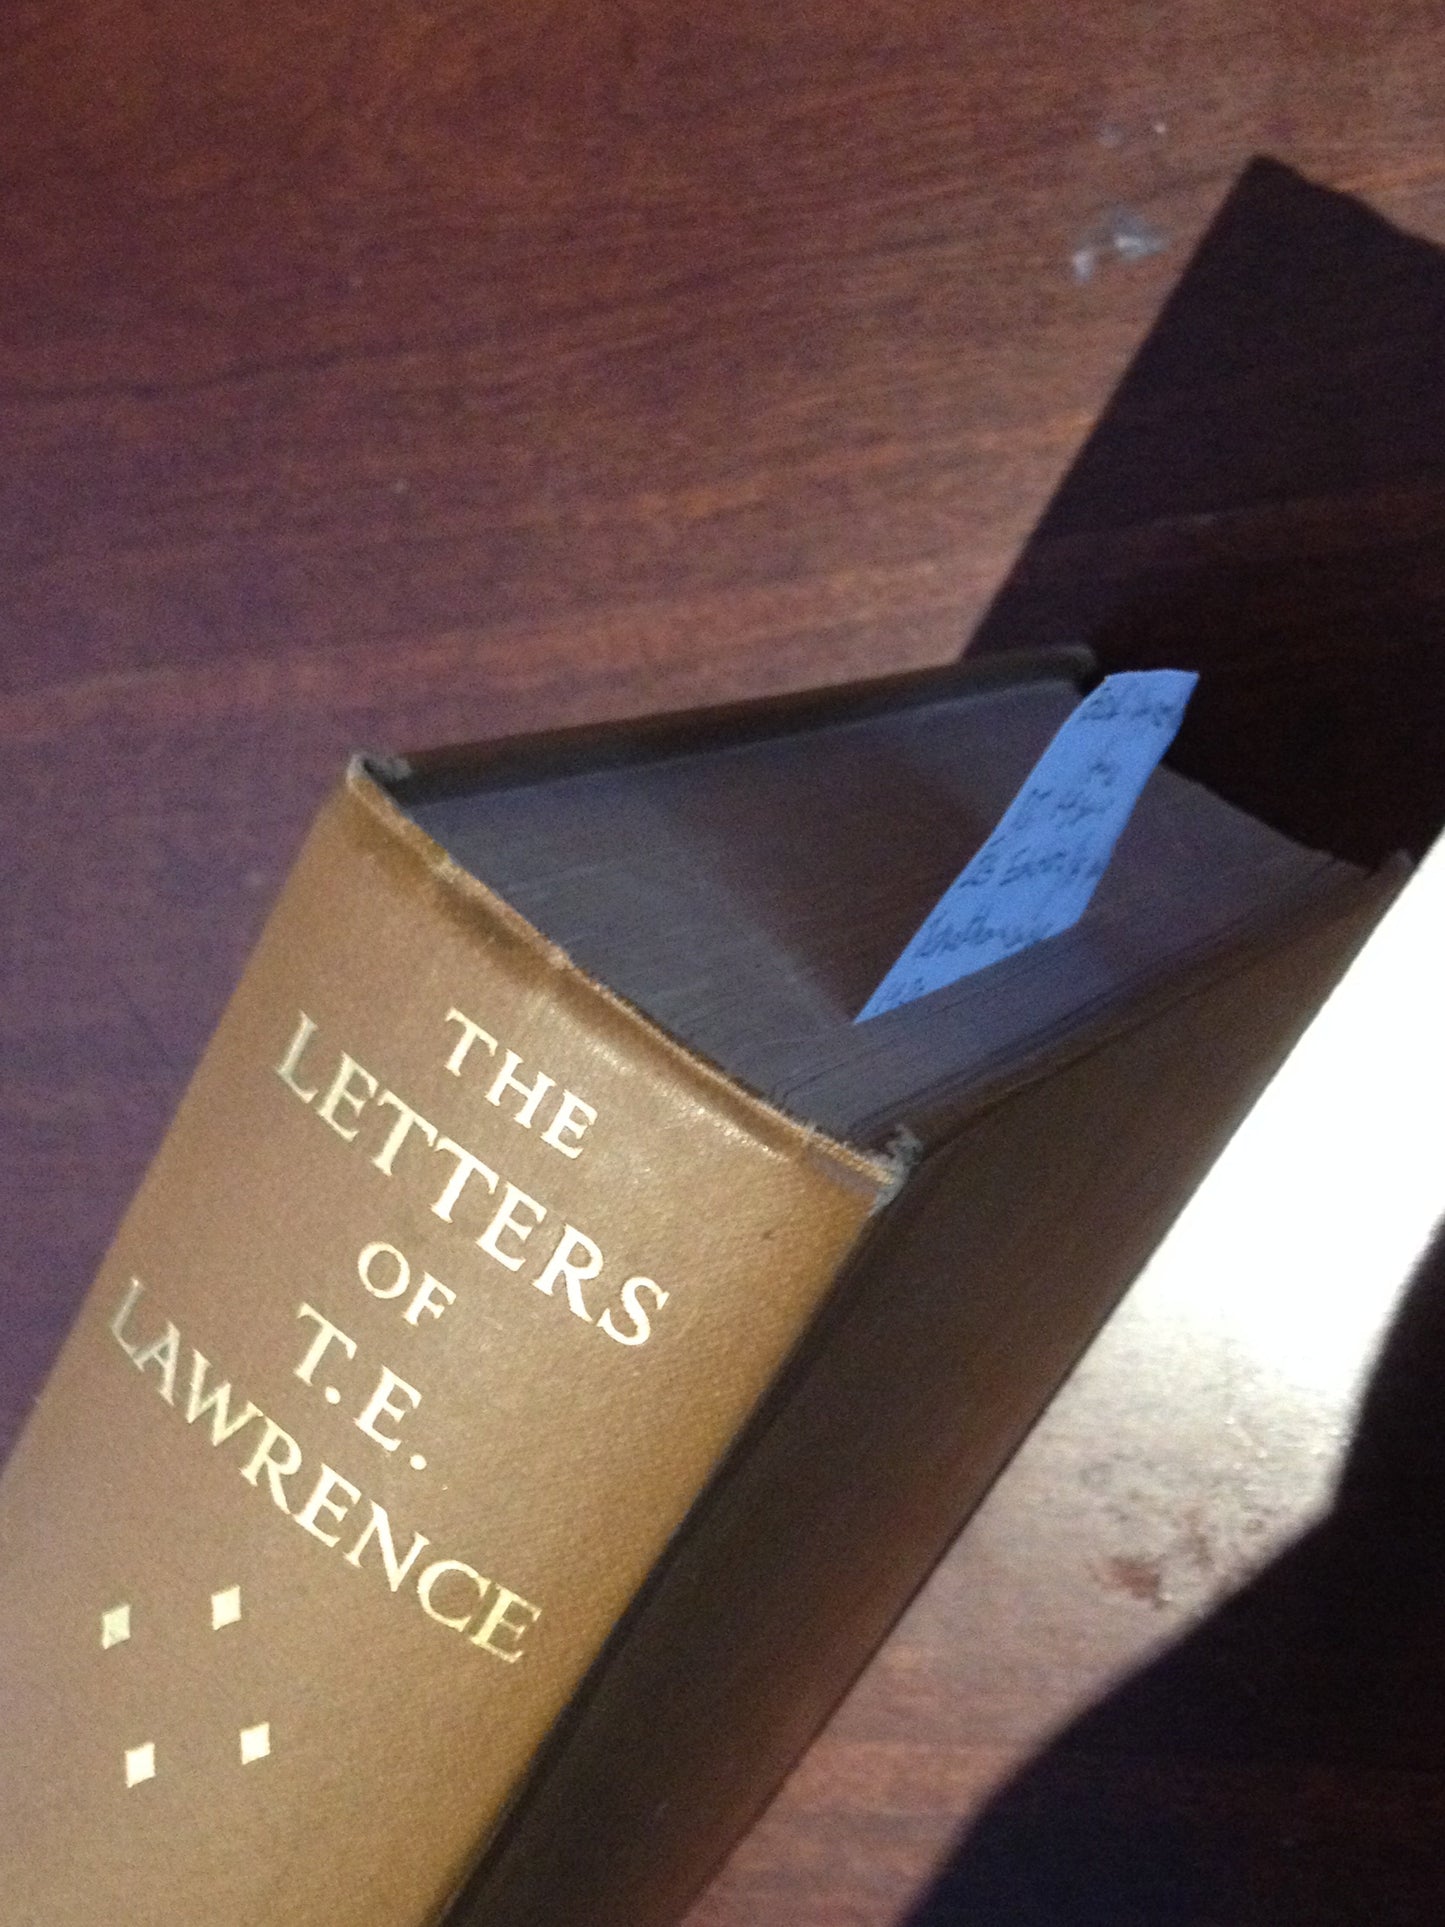 THE LETTERS OF TE LAWRENCE  EDITED BY: DAVID GARNETT BooksCardsNBikes